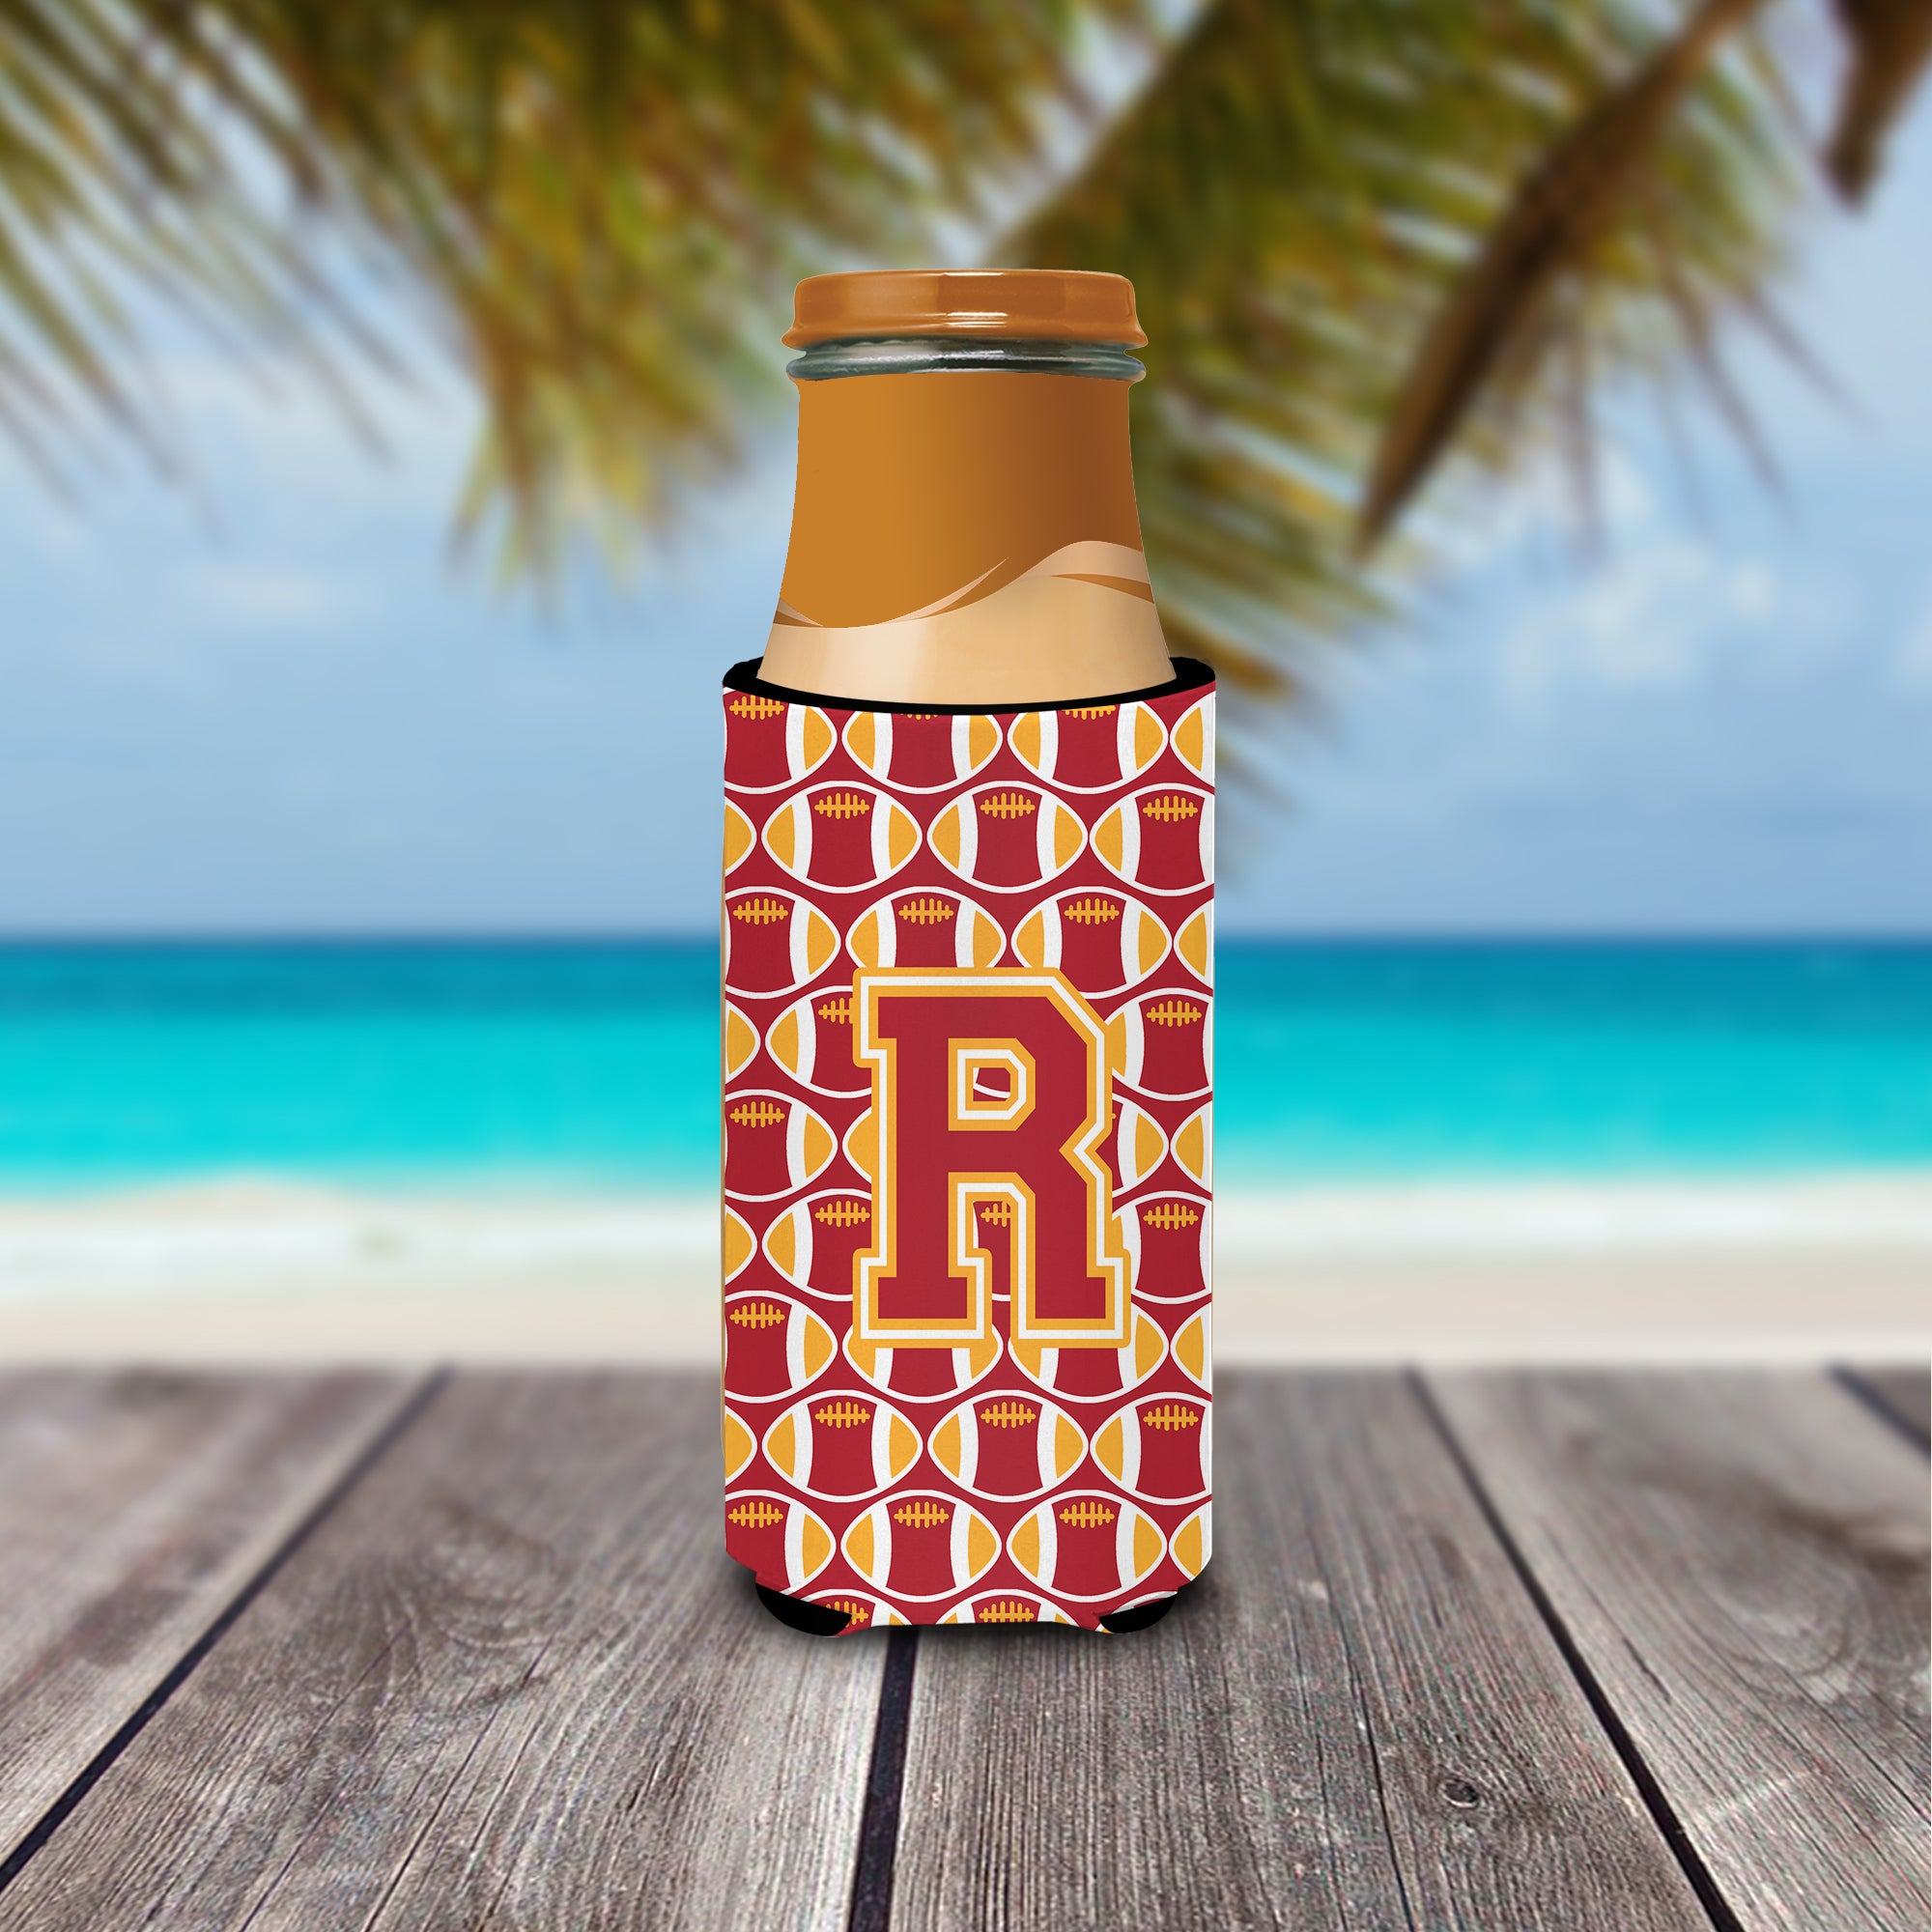 Letter R Football Cardinal and Gold Ultra Beverage Insulators for slim cans CJ1070-RMUK.